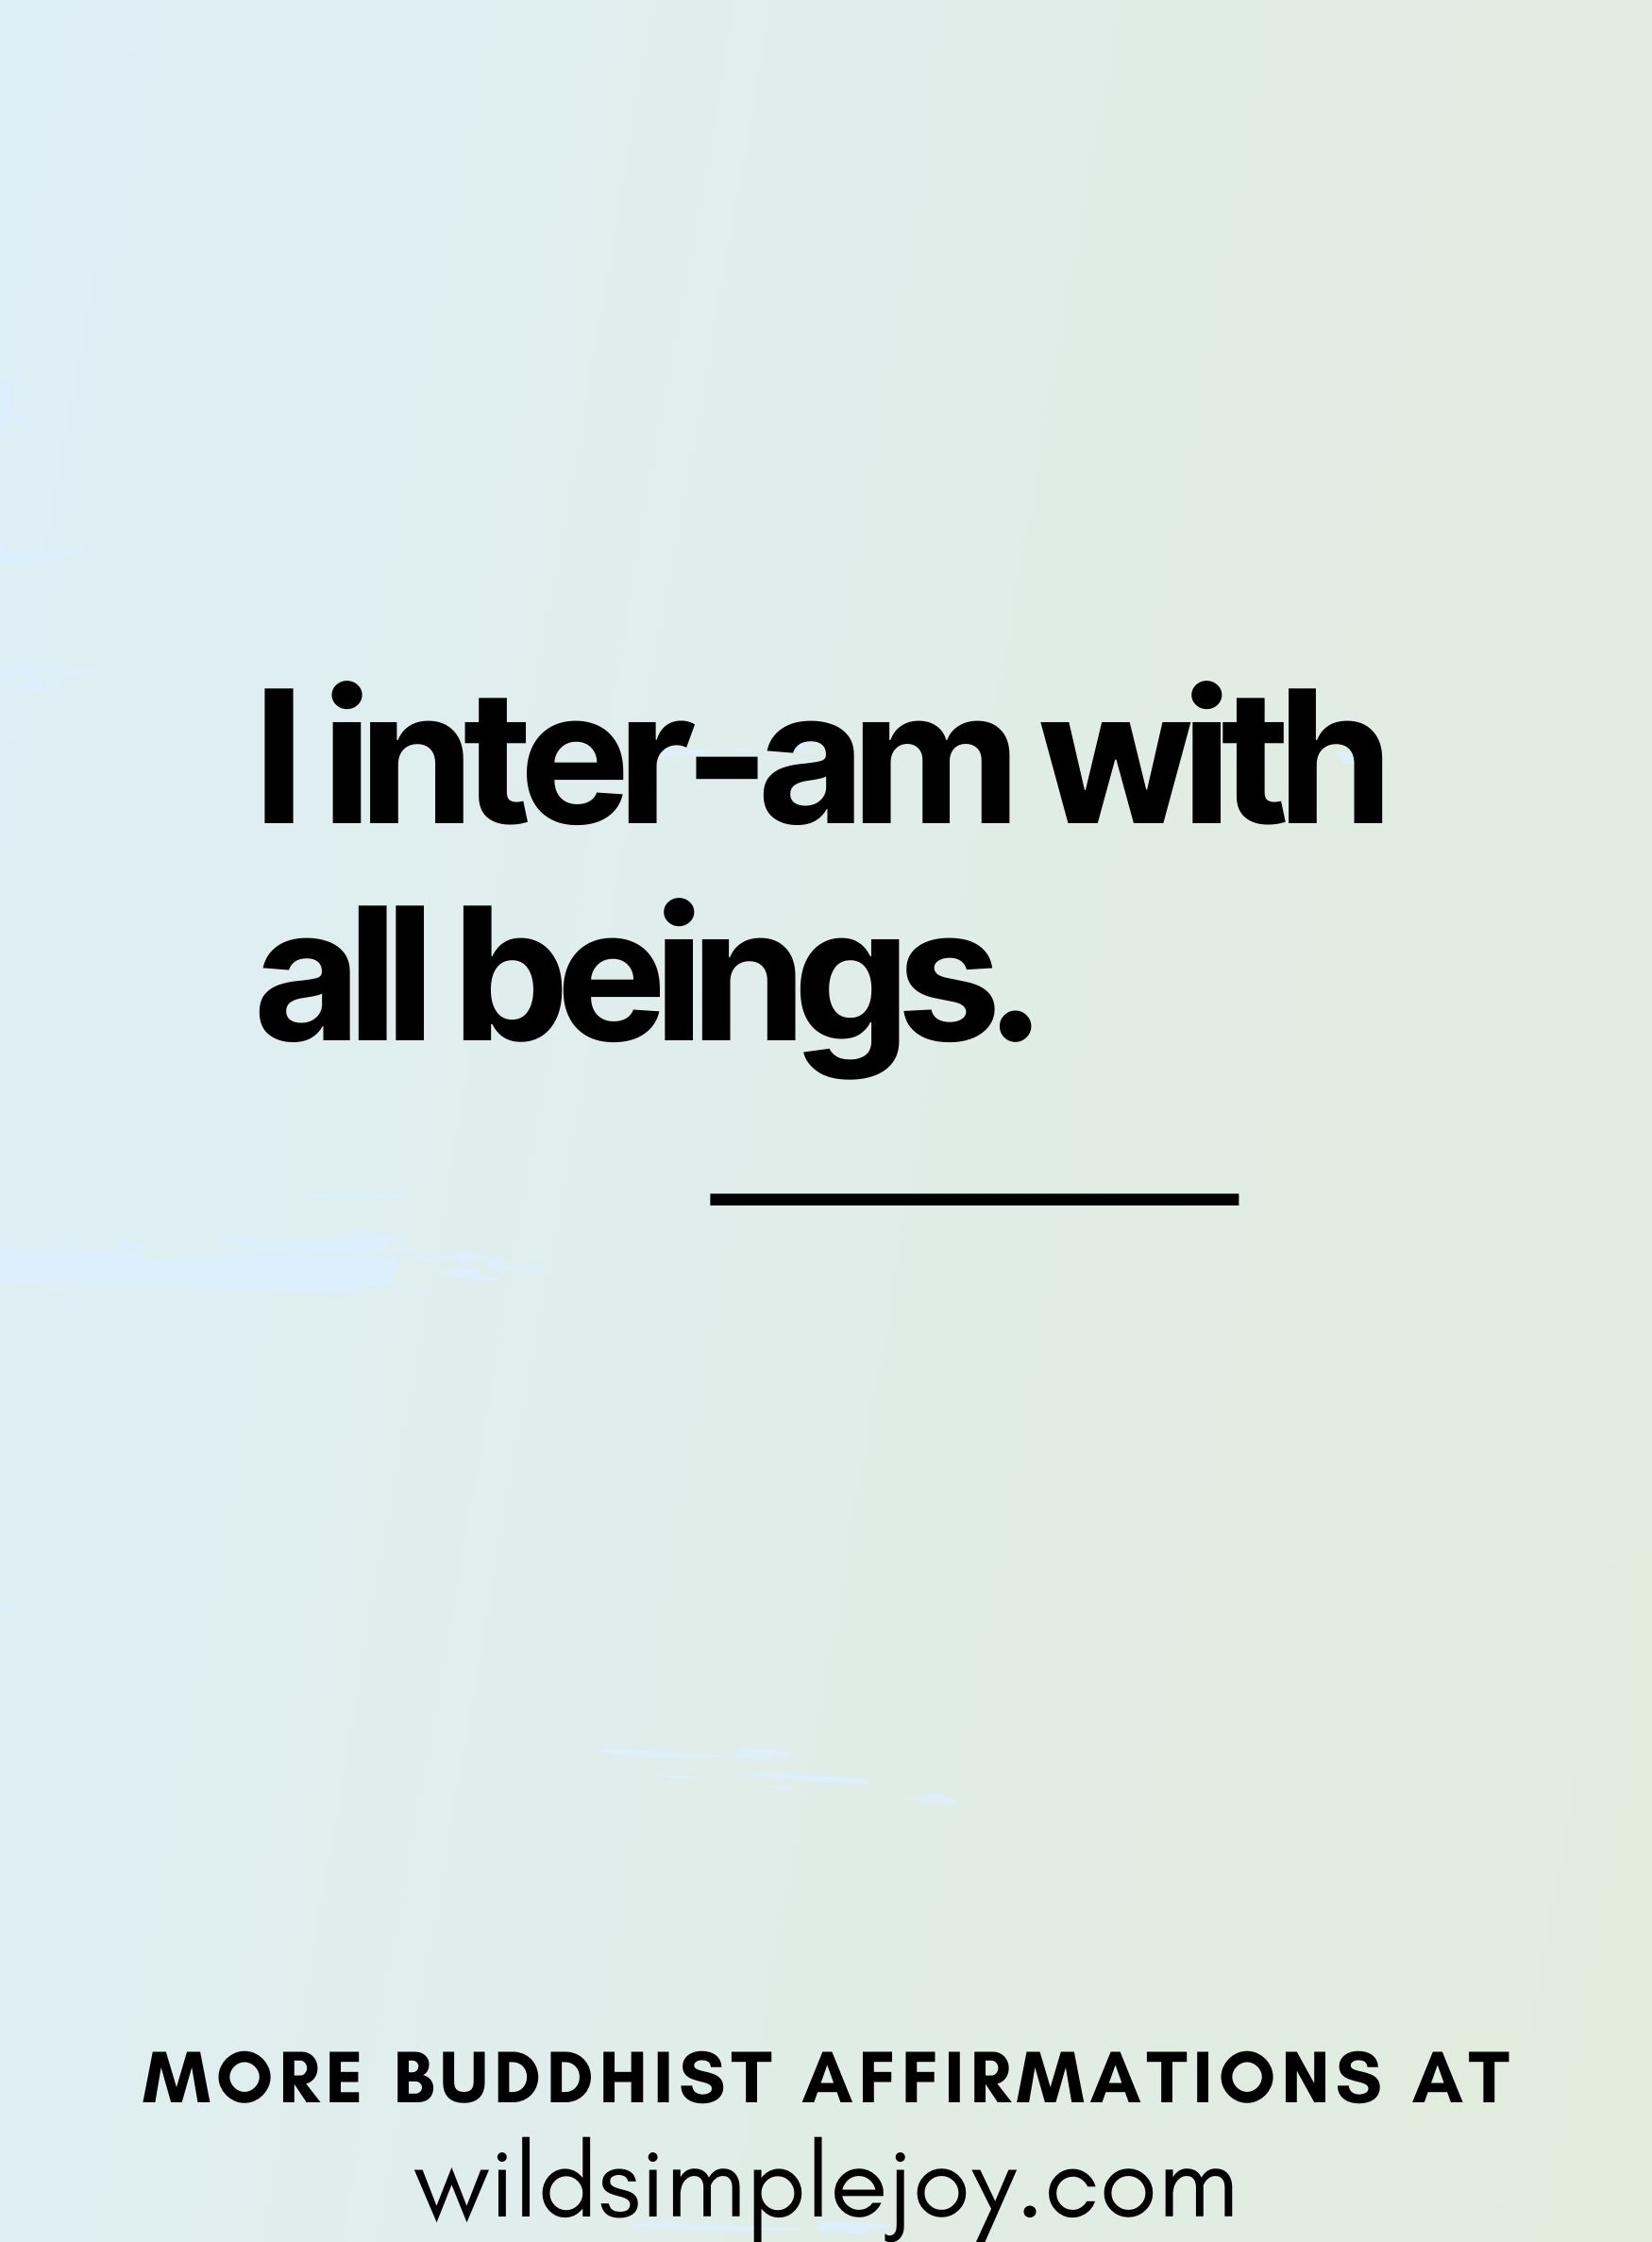 I inter-am with all beings. (on a blue and green background)